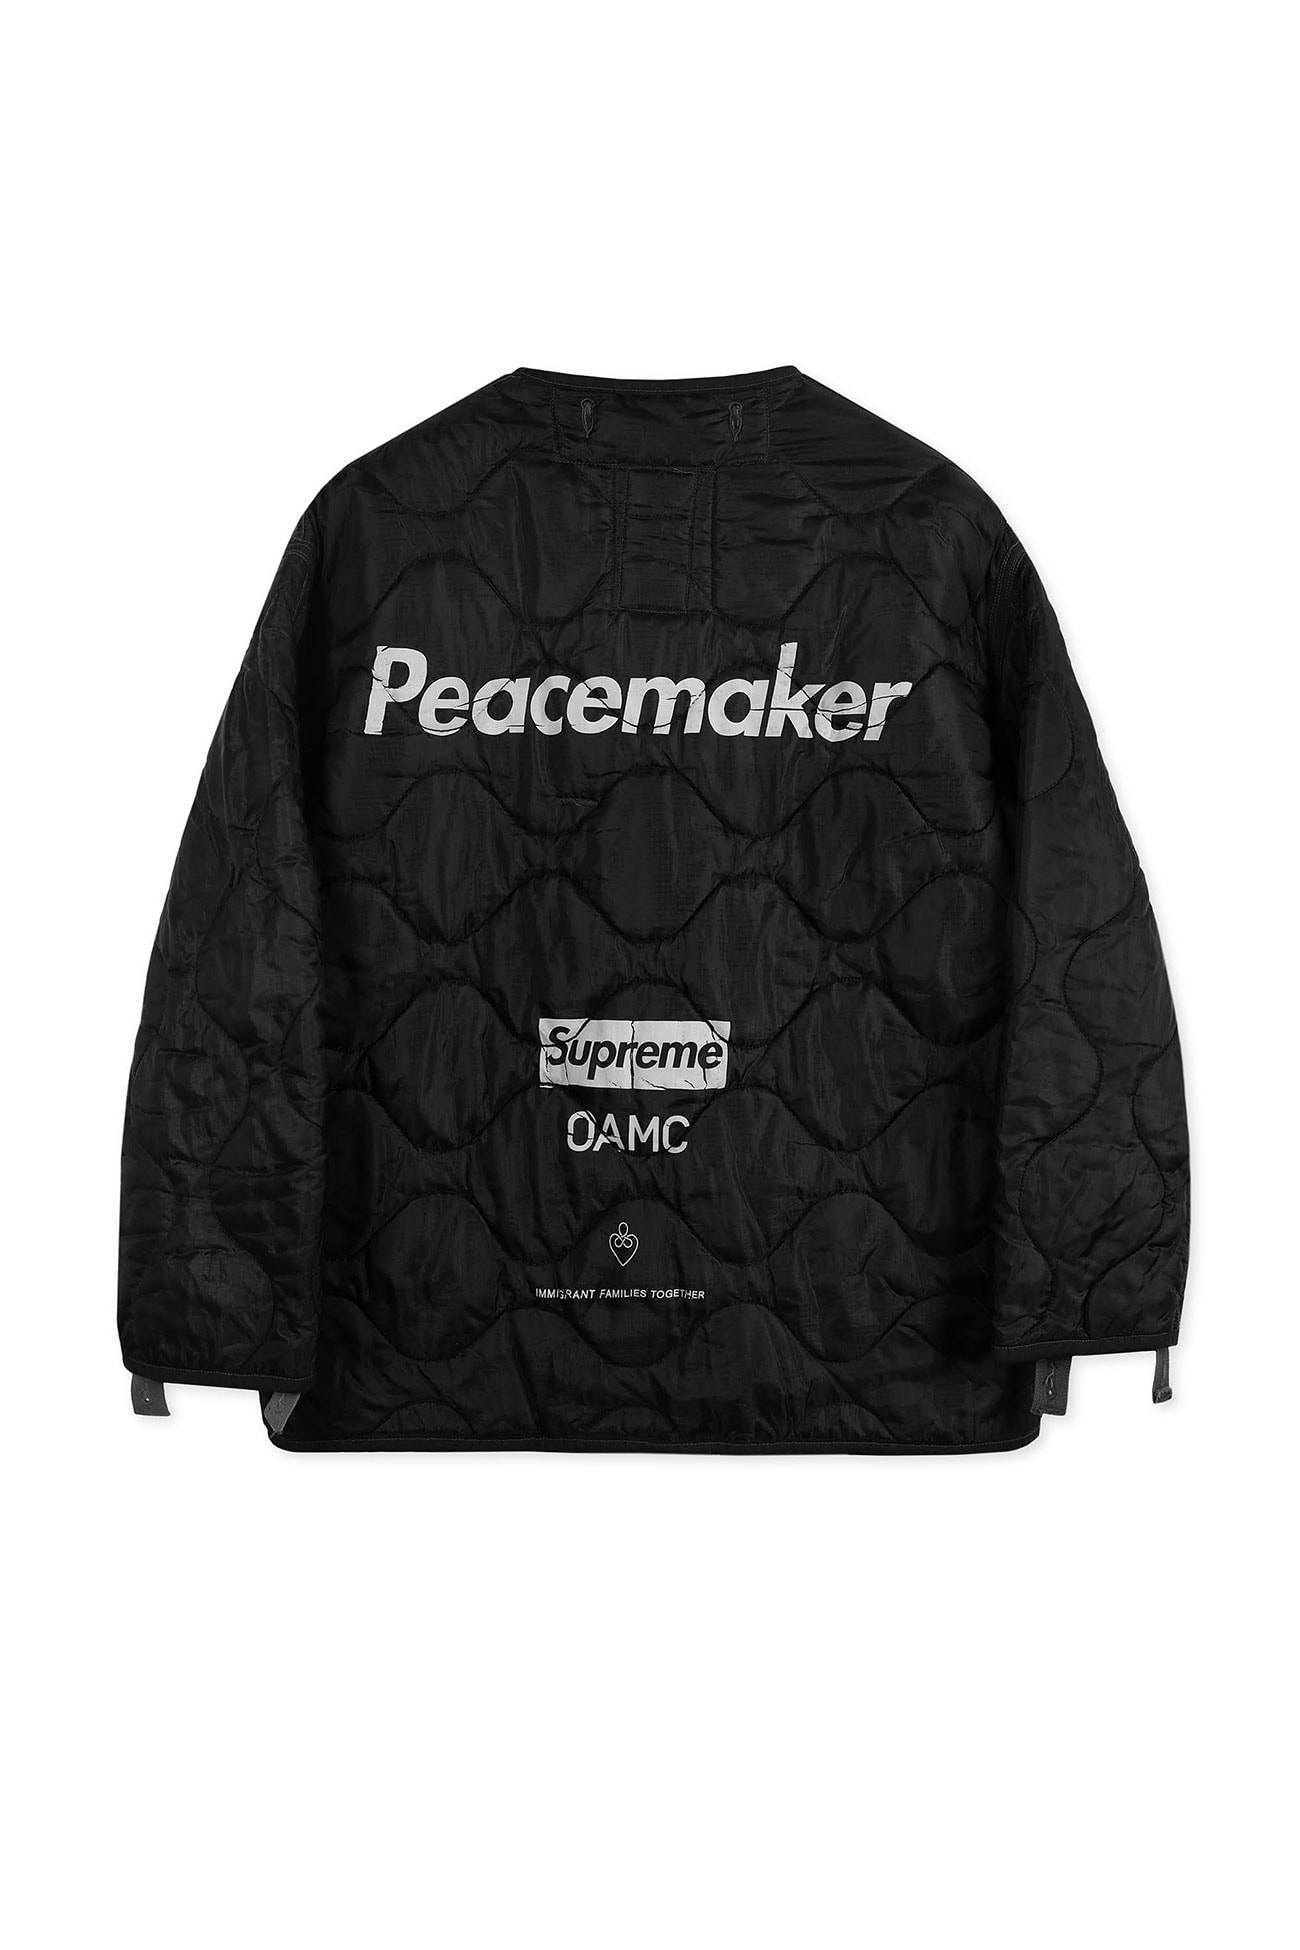 supreme oamc Immigration Families Together collaboration jacket release information charity peacemaker buy cop purchase pre order details luke meier